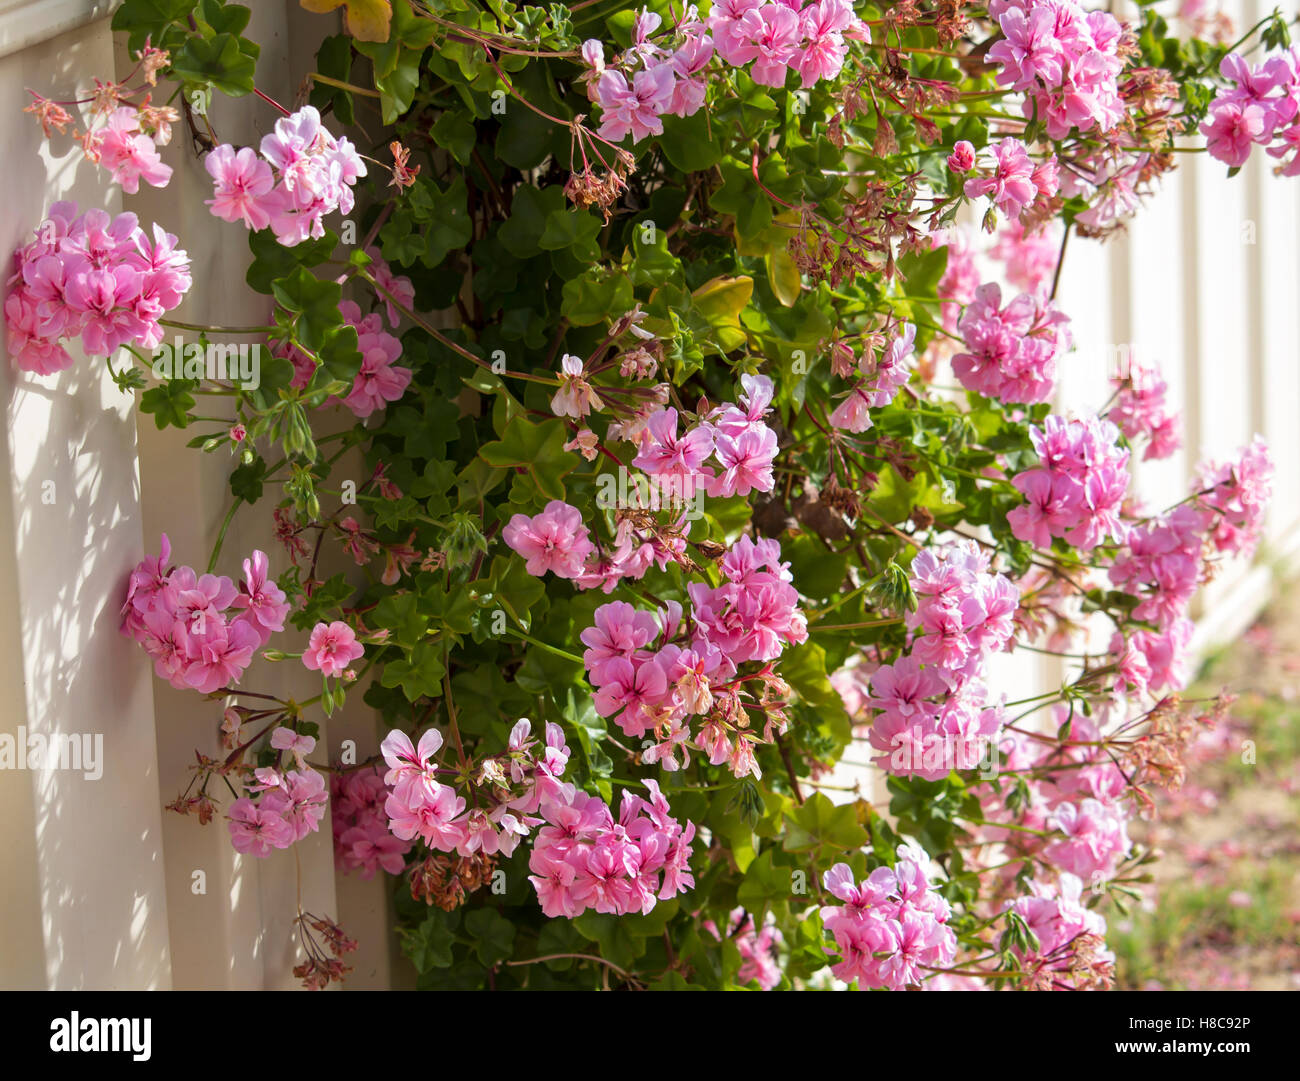 Beautiful  double candy  pink  flowers of  geranium species covering a white painted wooden  fence  in late spring  adds color to the garden landscape. Stock Photo